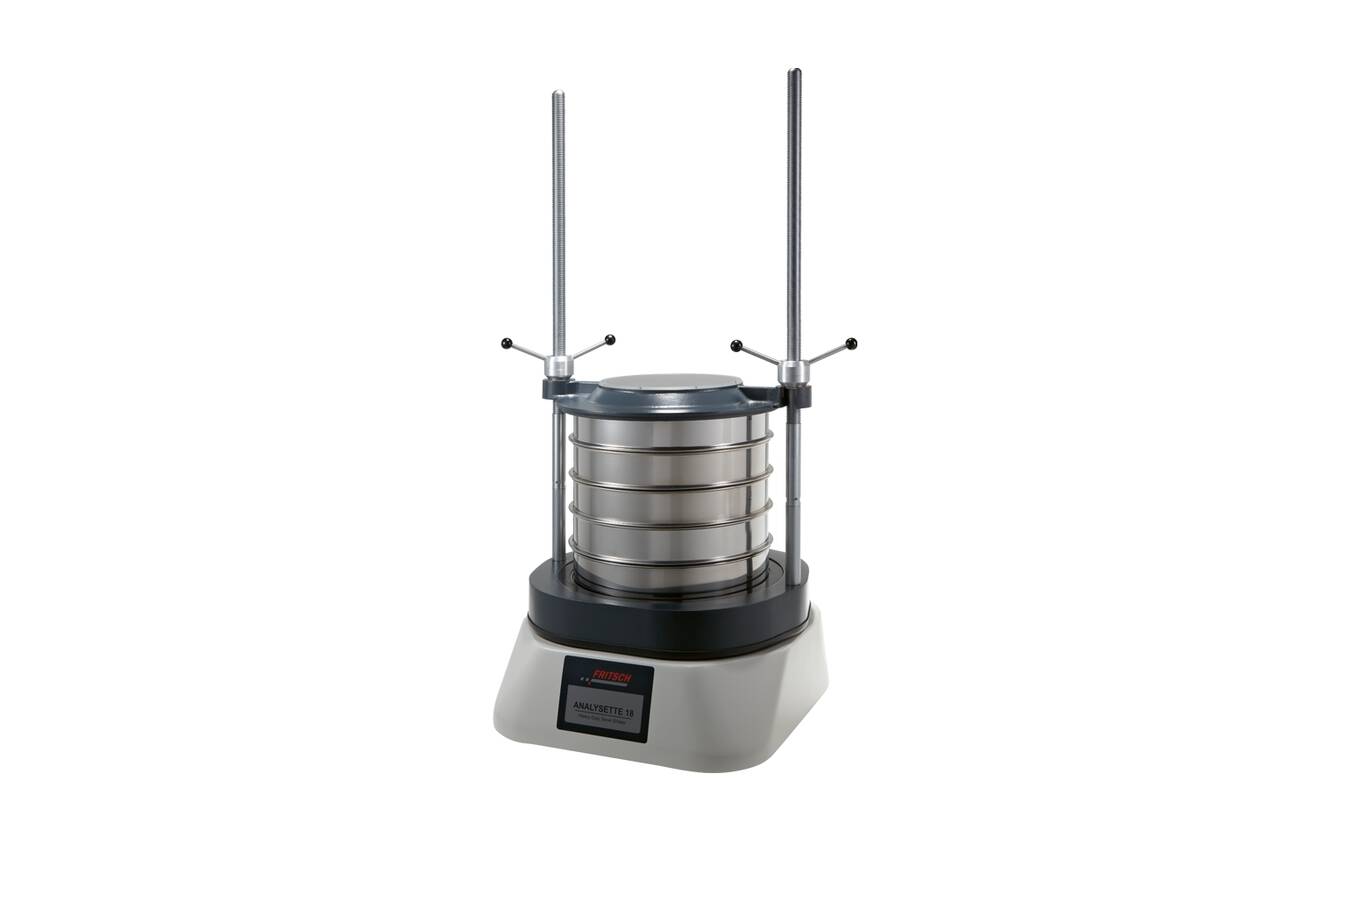 Effective sieving of large quantities The robust Heavy Duty Analytical Sieve Shaker from FRITSCH 